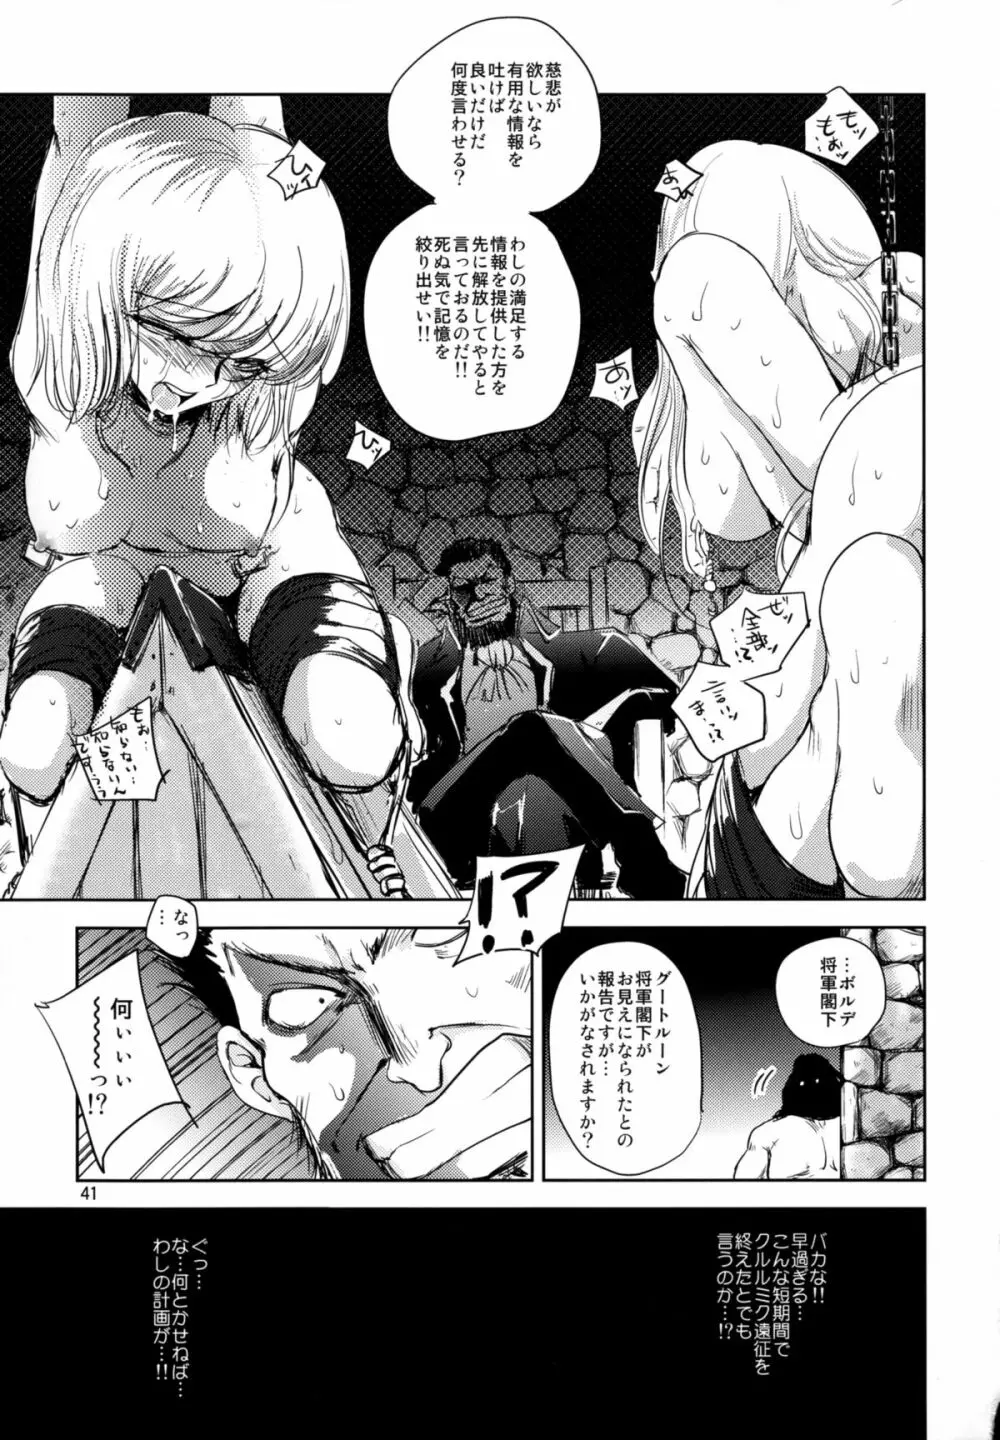 GRASSEN'S WAR ANOTHER STORY Ex #05 ノード侵攻 V Page.41